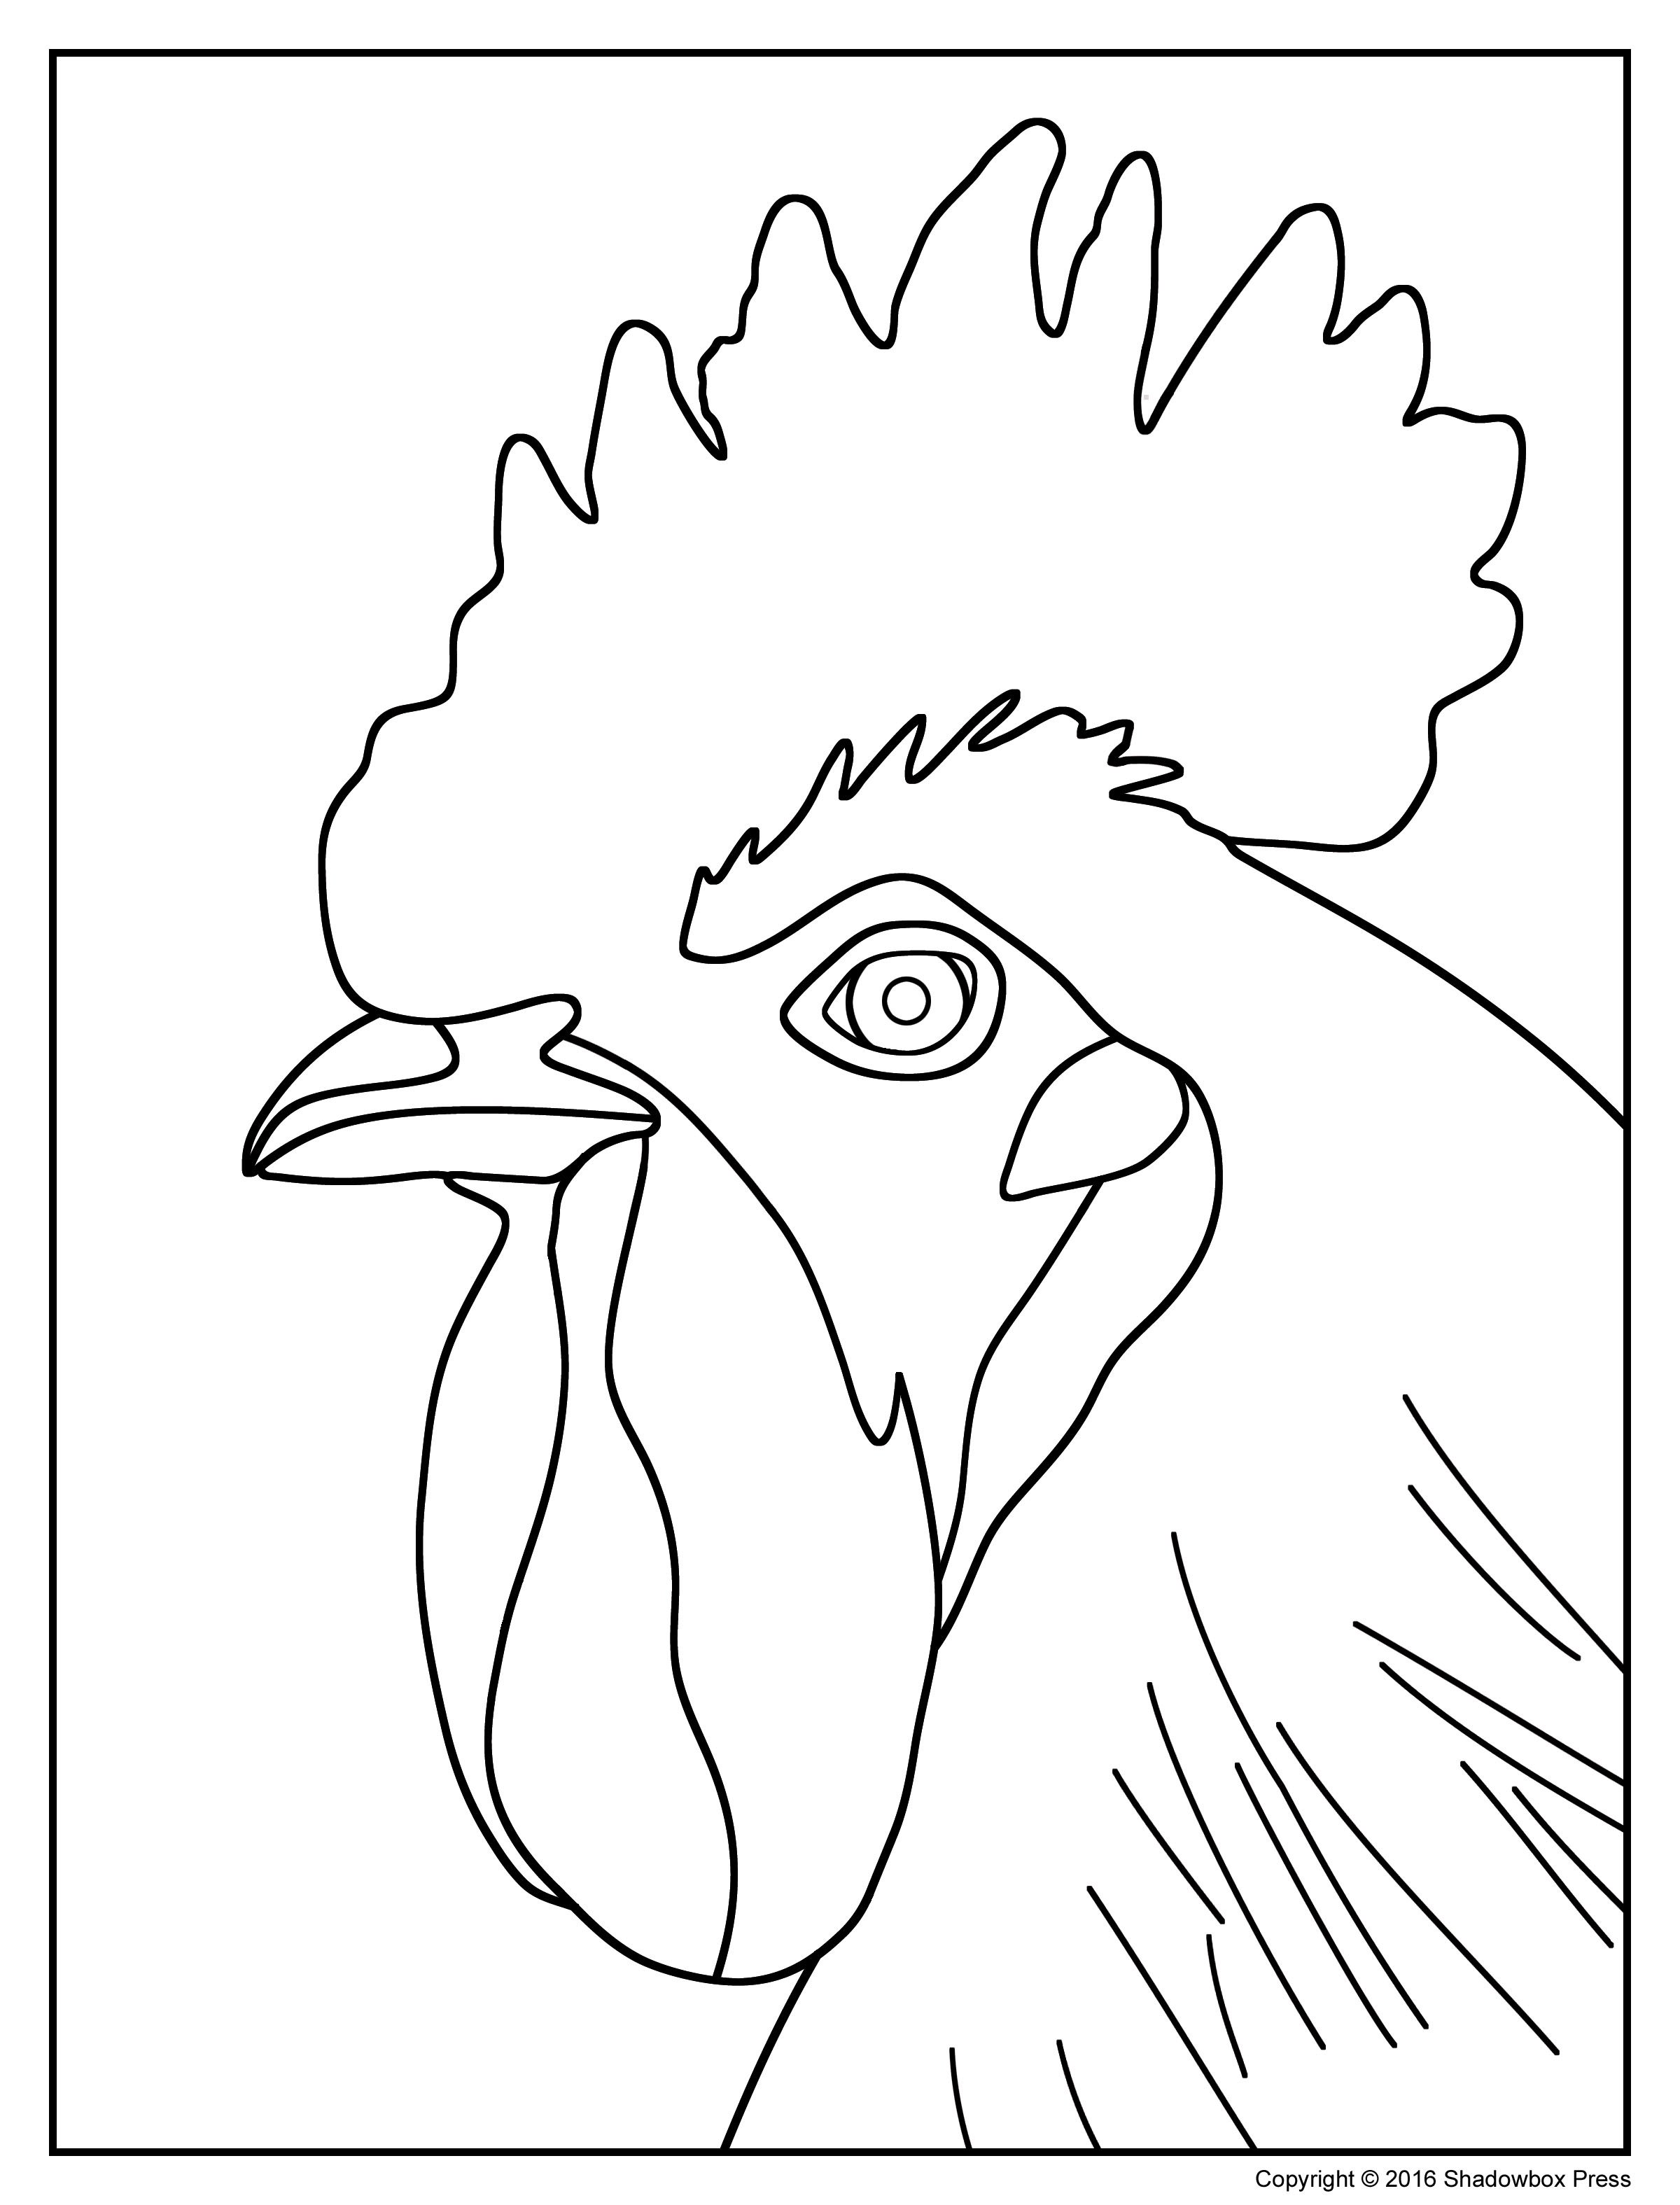 printable-coloring-pages-for-adults-with-dementia-coloring-pages-printable-coloring-pages-for